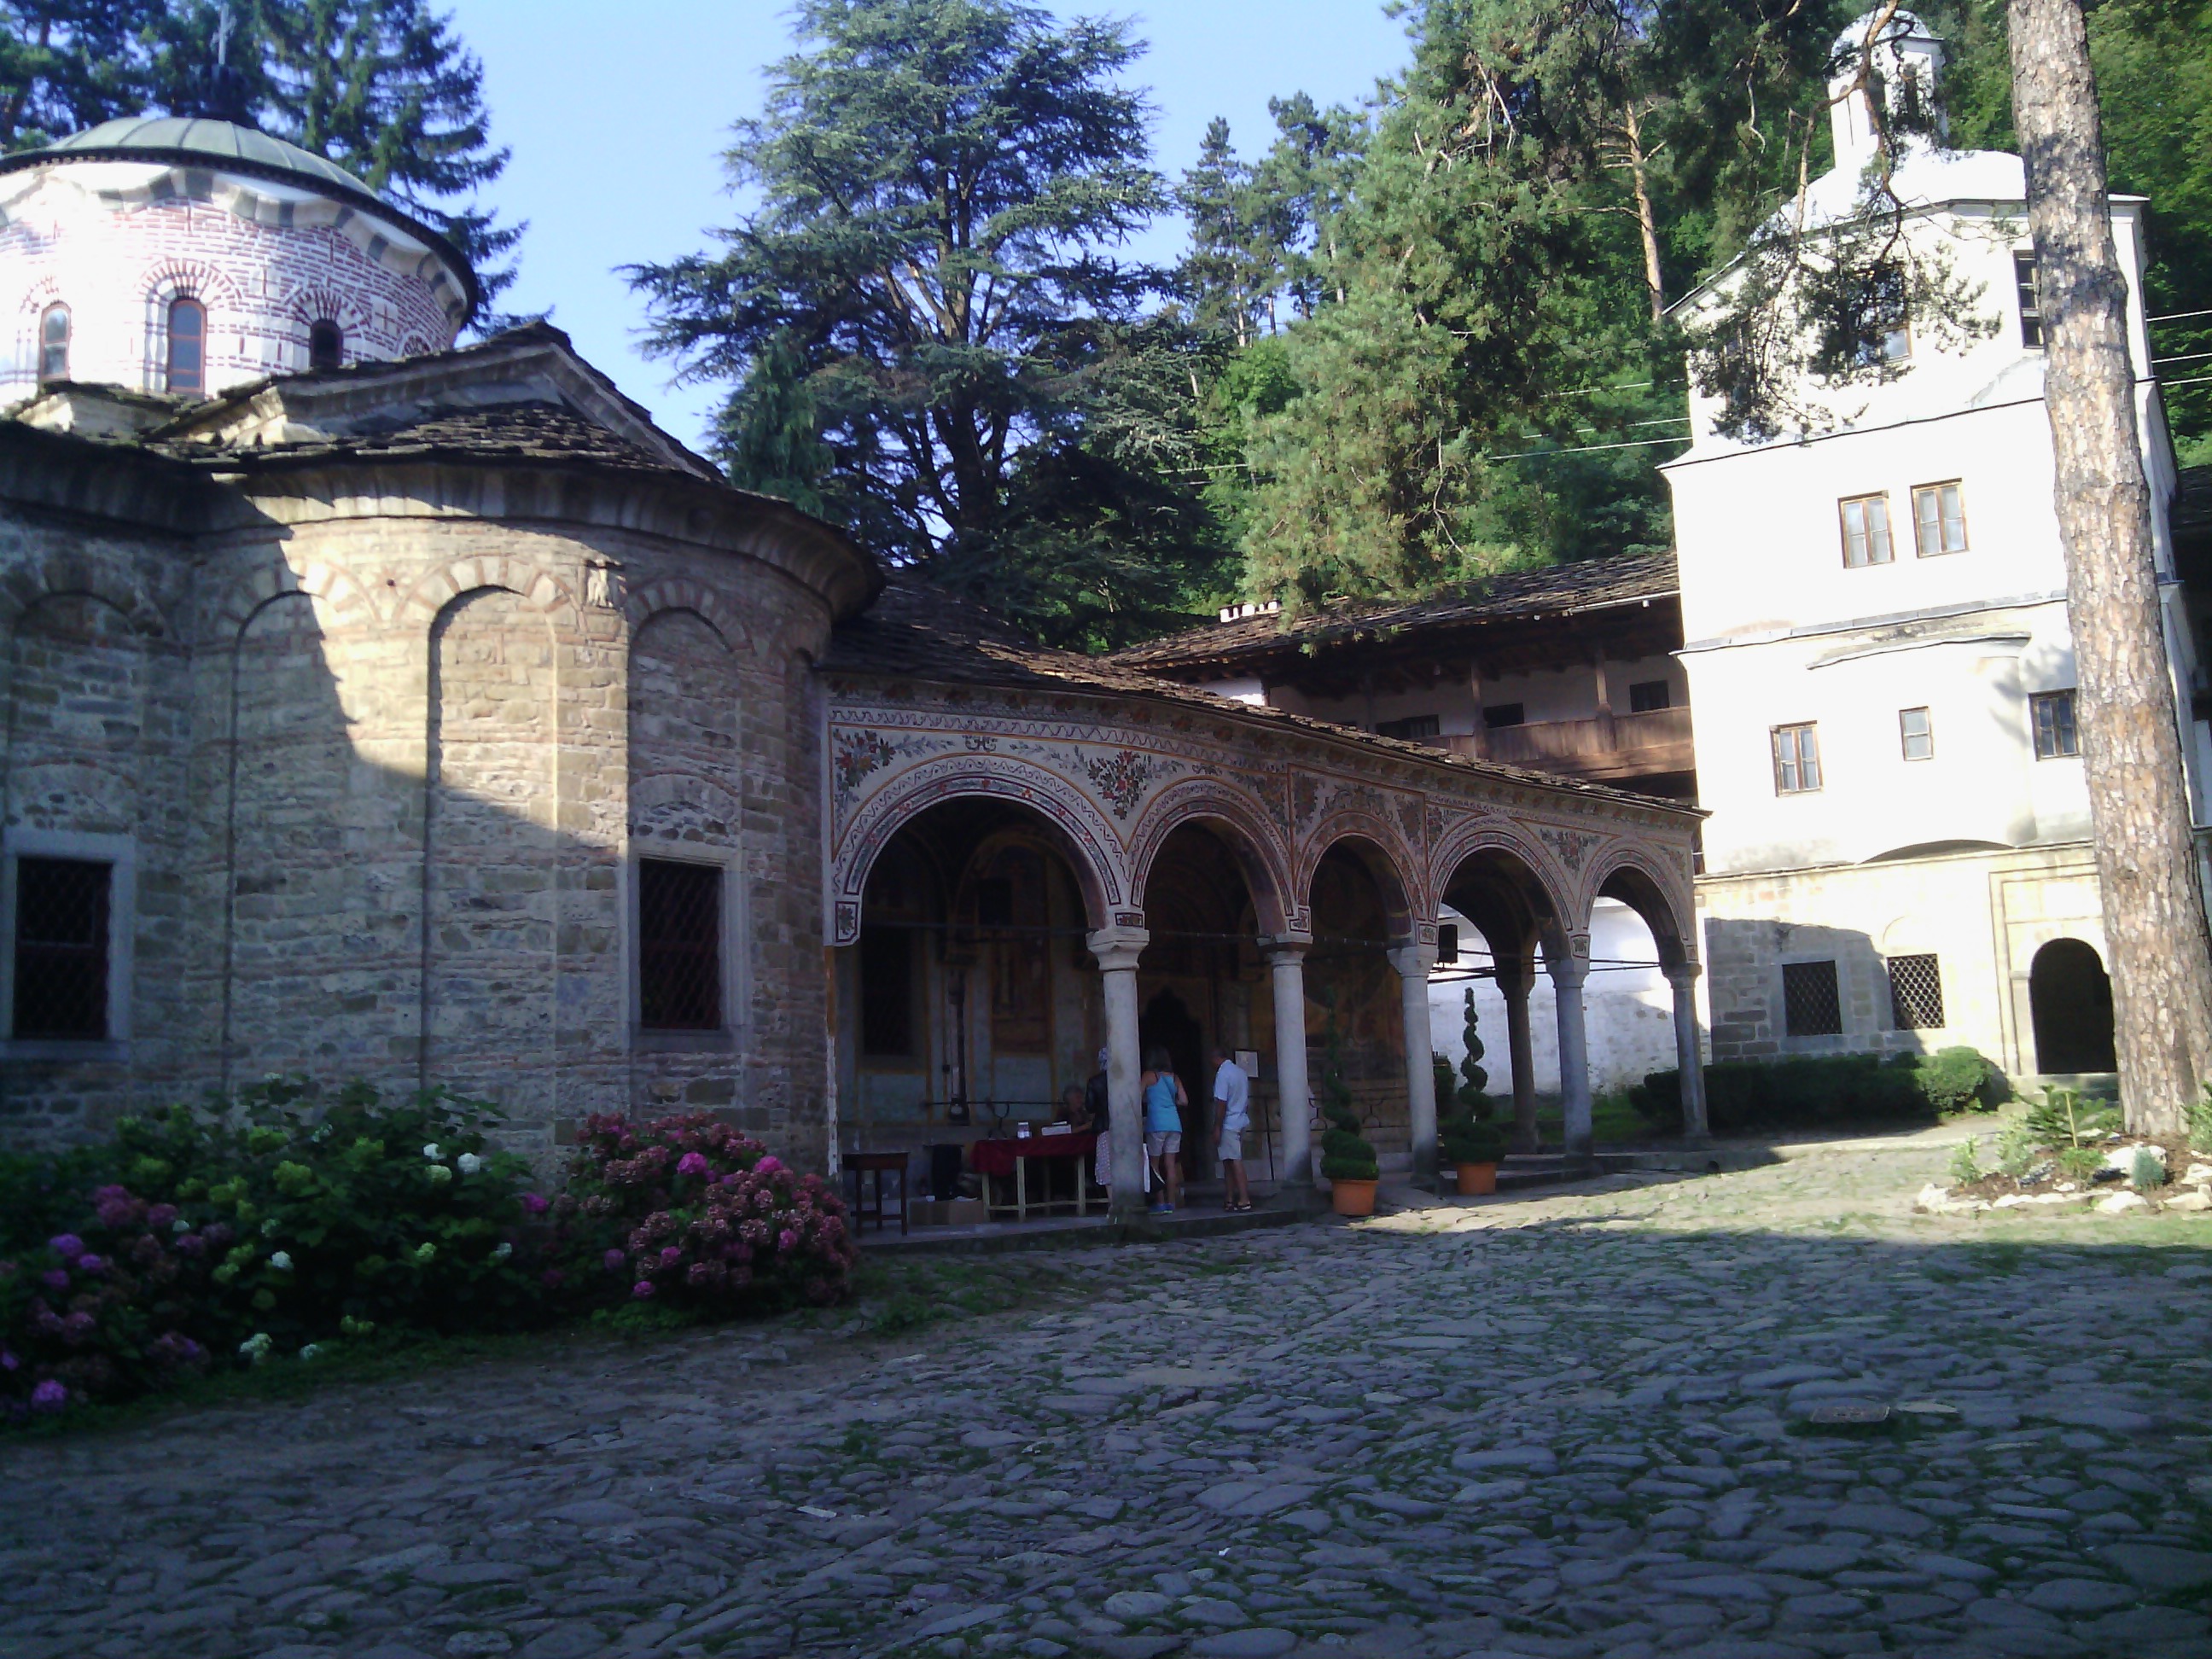 Troan Monastery Church - Trip to Troyan Monastery from 16th century Bulgaria - 3rd monastery by size in Bulgaria